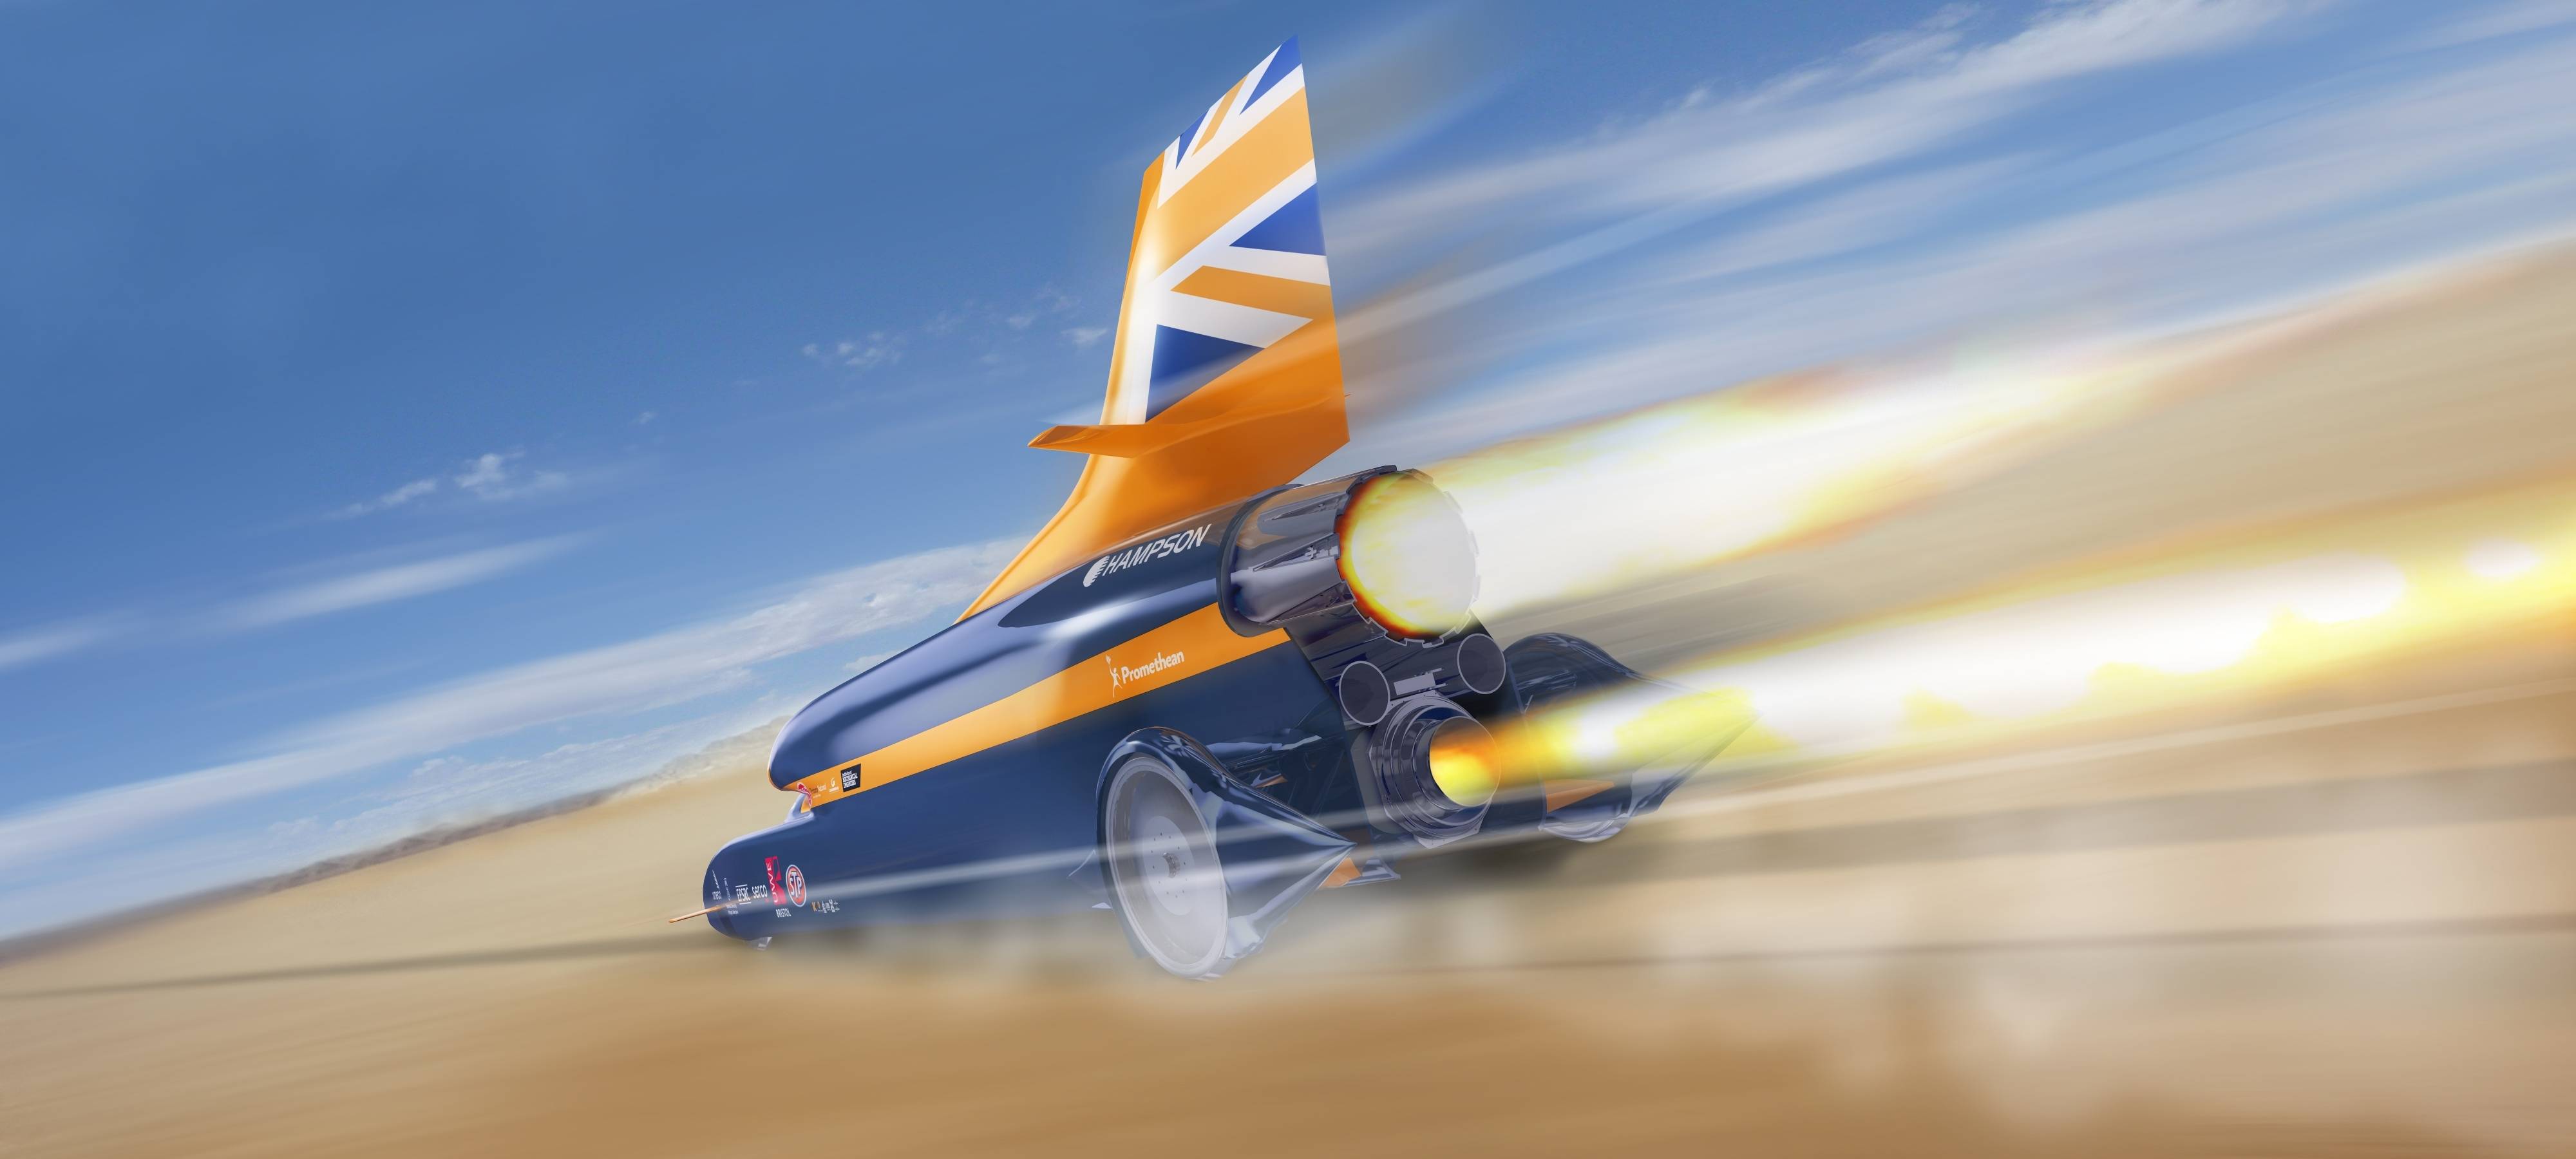 image For > Bloodhound Ssc Wallpaper